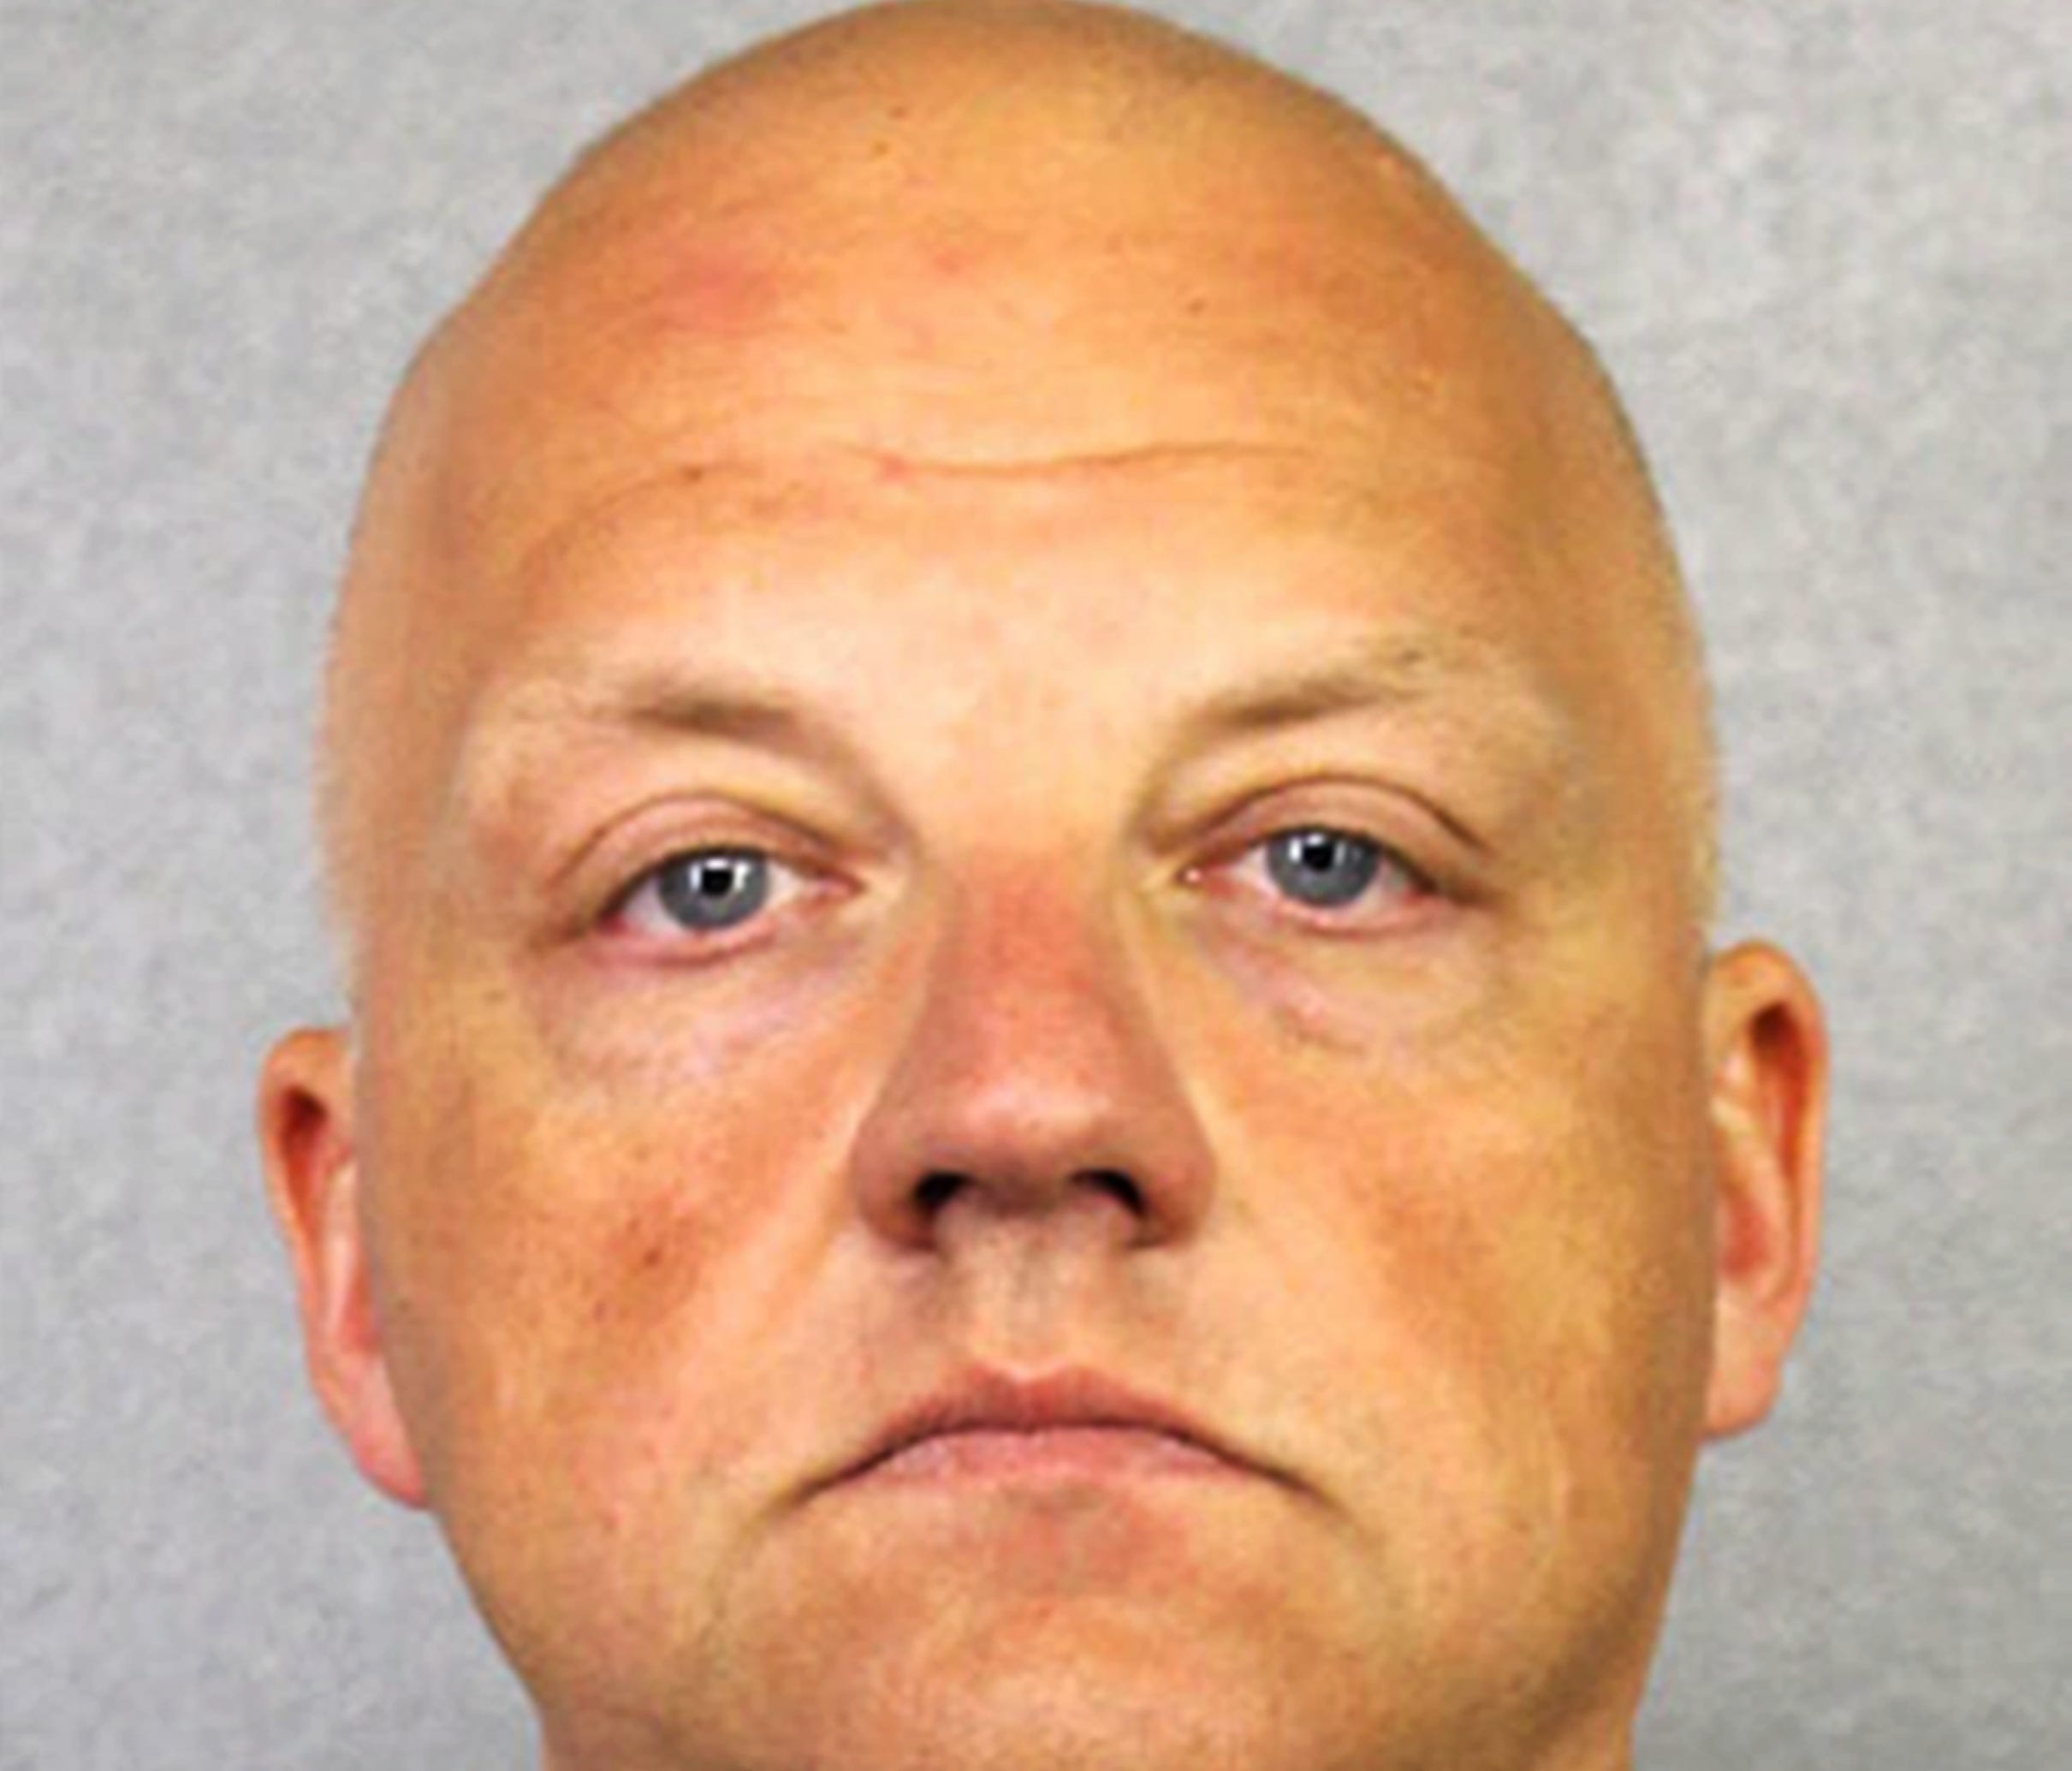 FILE - This January 2017 file photo provided by the Broward County Sheriff's Office shows German Volkswagen executive Oliver Schmidt. Schmidt, a former manager of a VW engineering office in suburban Detroit, pleaded guilty Friday, Aug. 4, 2017, to co